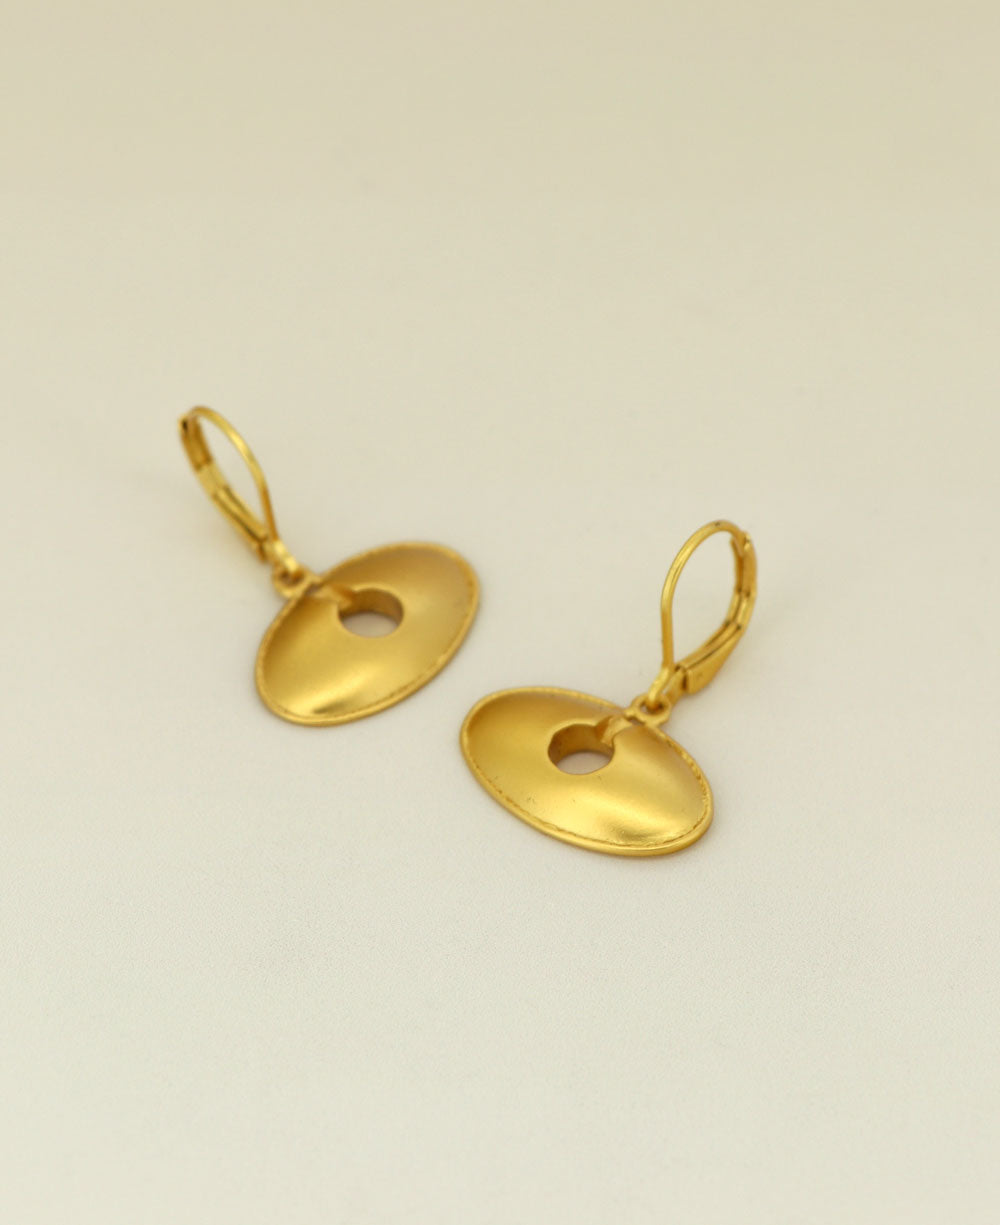 Gold Plated Oval Keyhole Symbol Earrings displayed against a neutral background, emphasizing their historical design and lustrous sheen